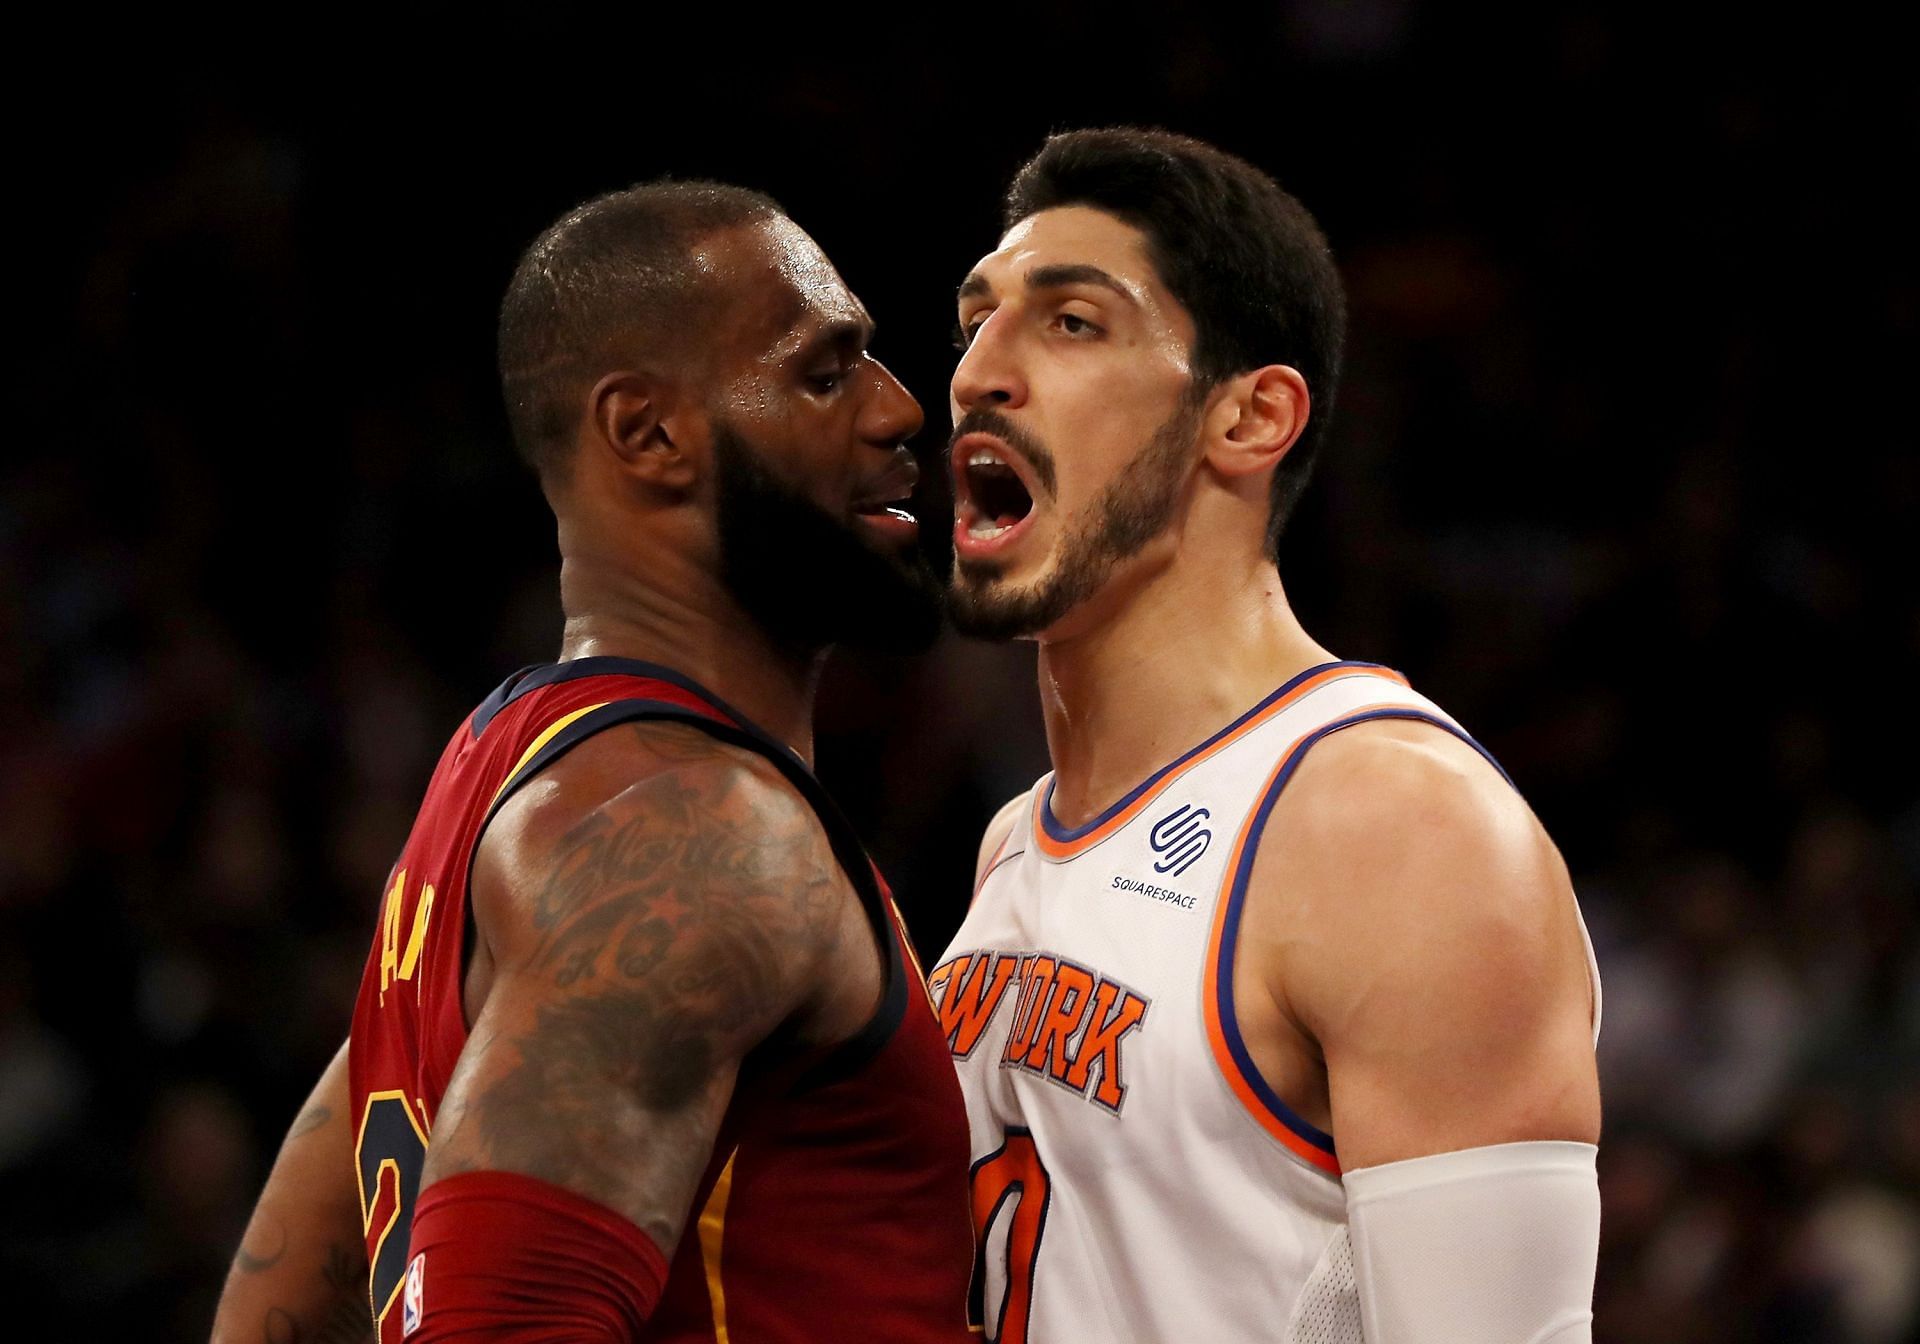 LeBron James and Enes Kanter Freedom had a confrontation back in 2017